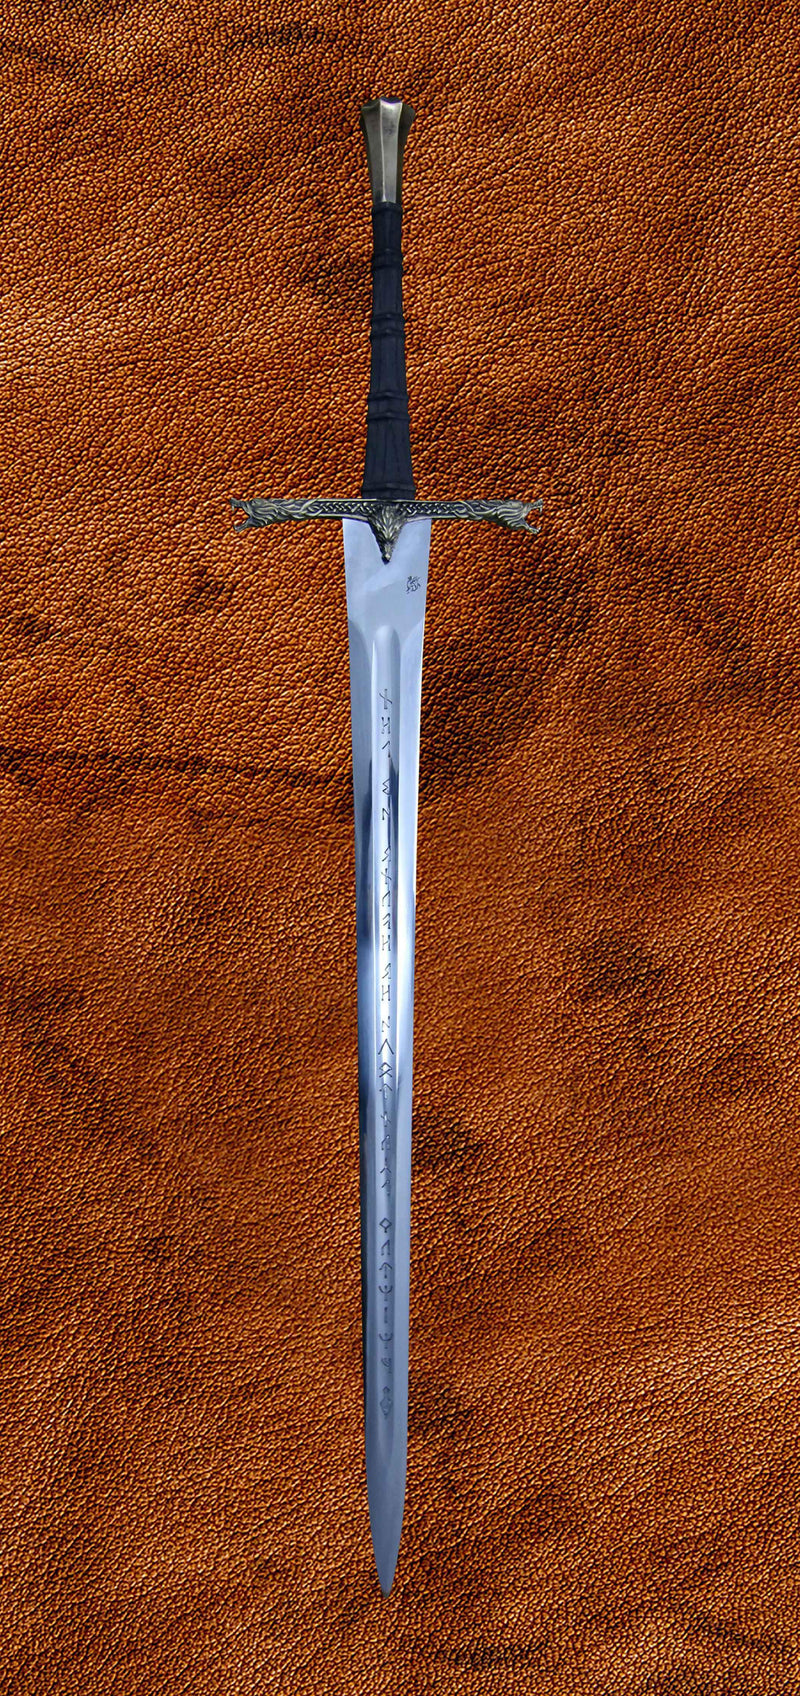 The Eindride Lone Wolf Sword | The Medieval Store 